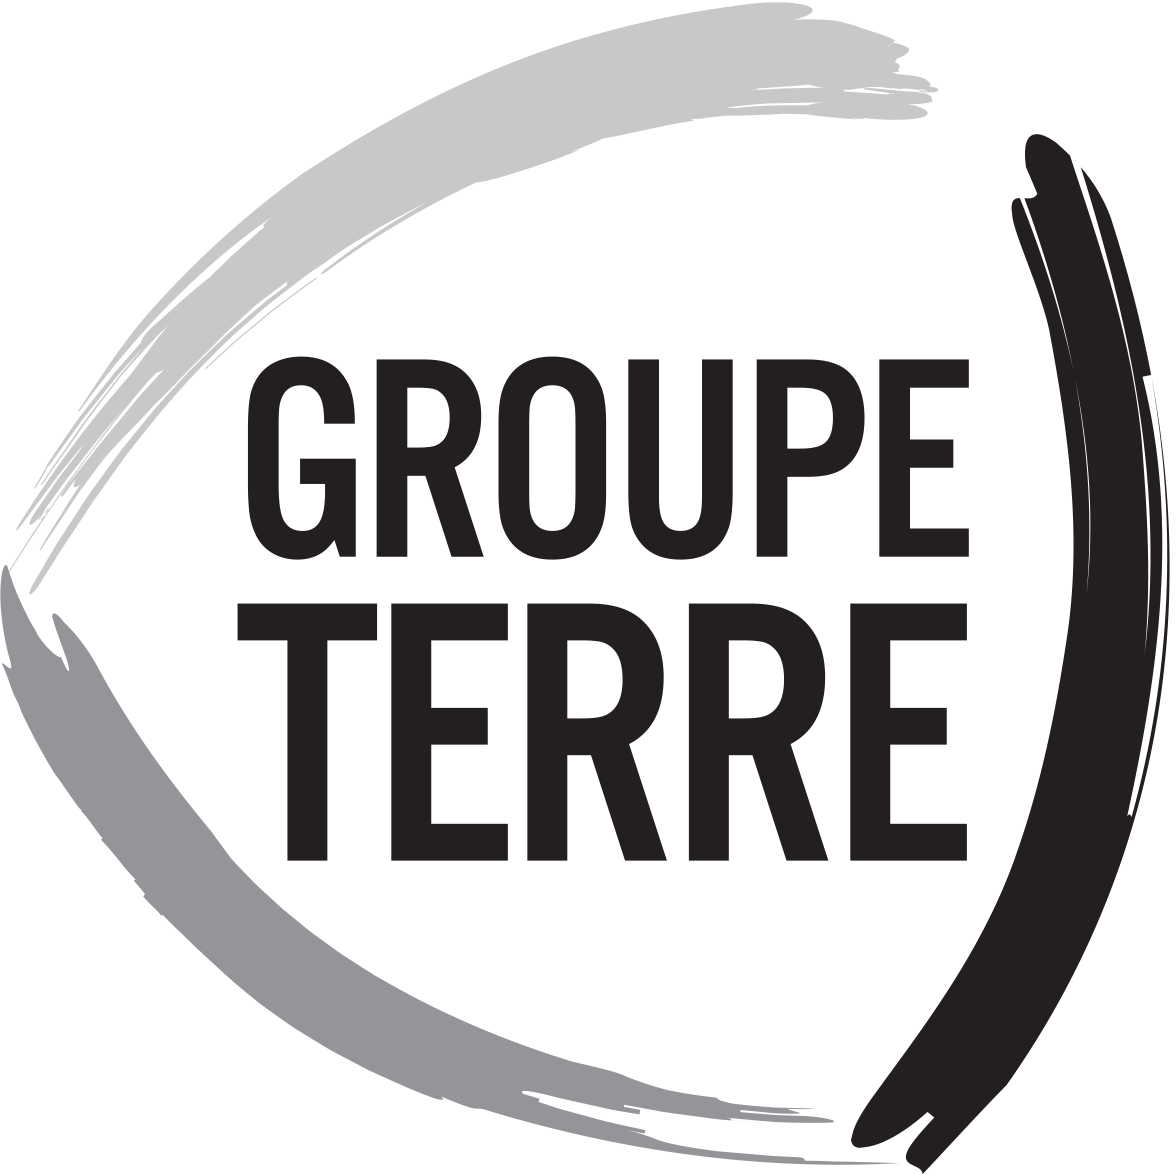 Groupe terre asbl